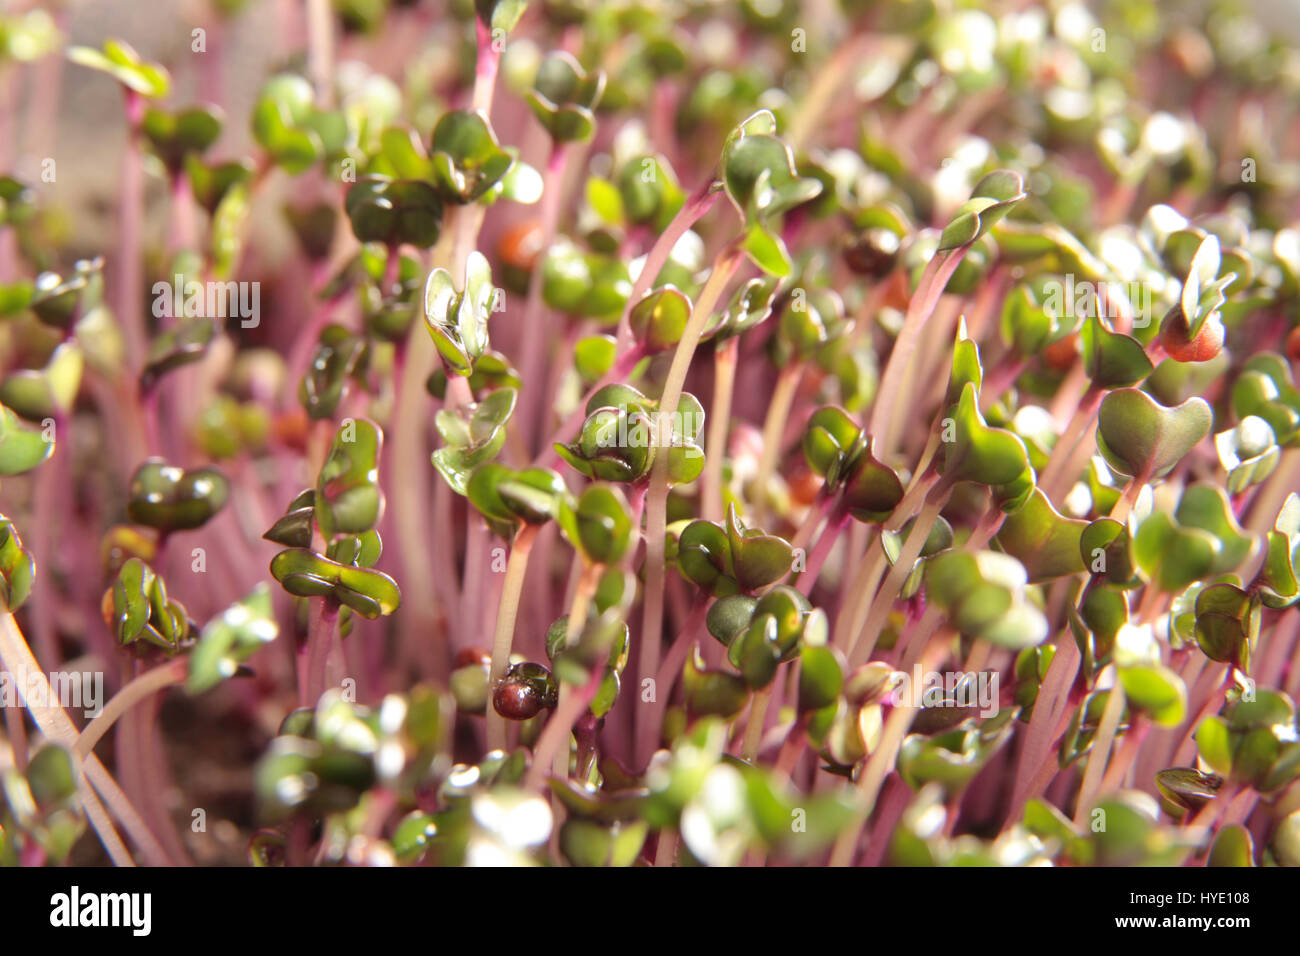 Red cabbage microgreens Stock Photo